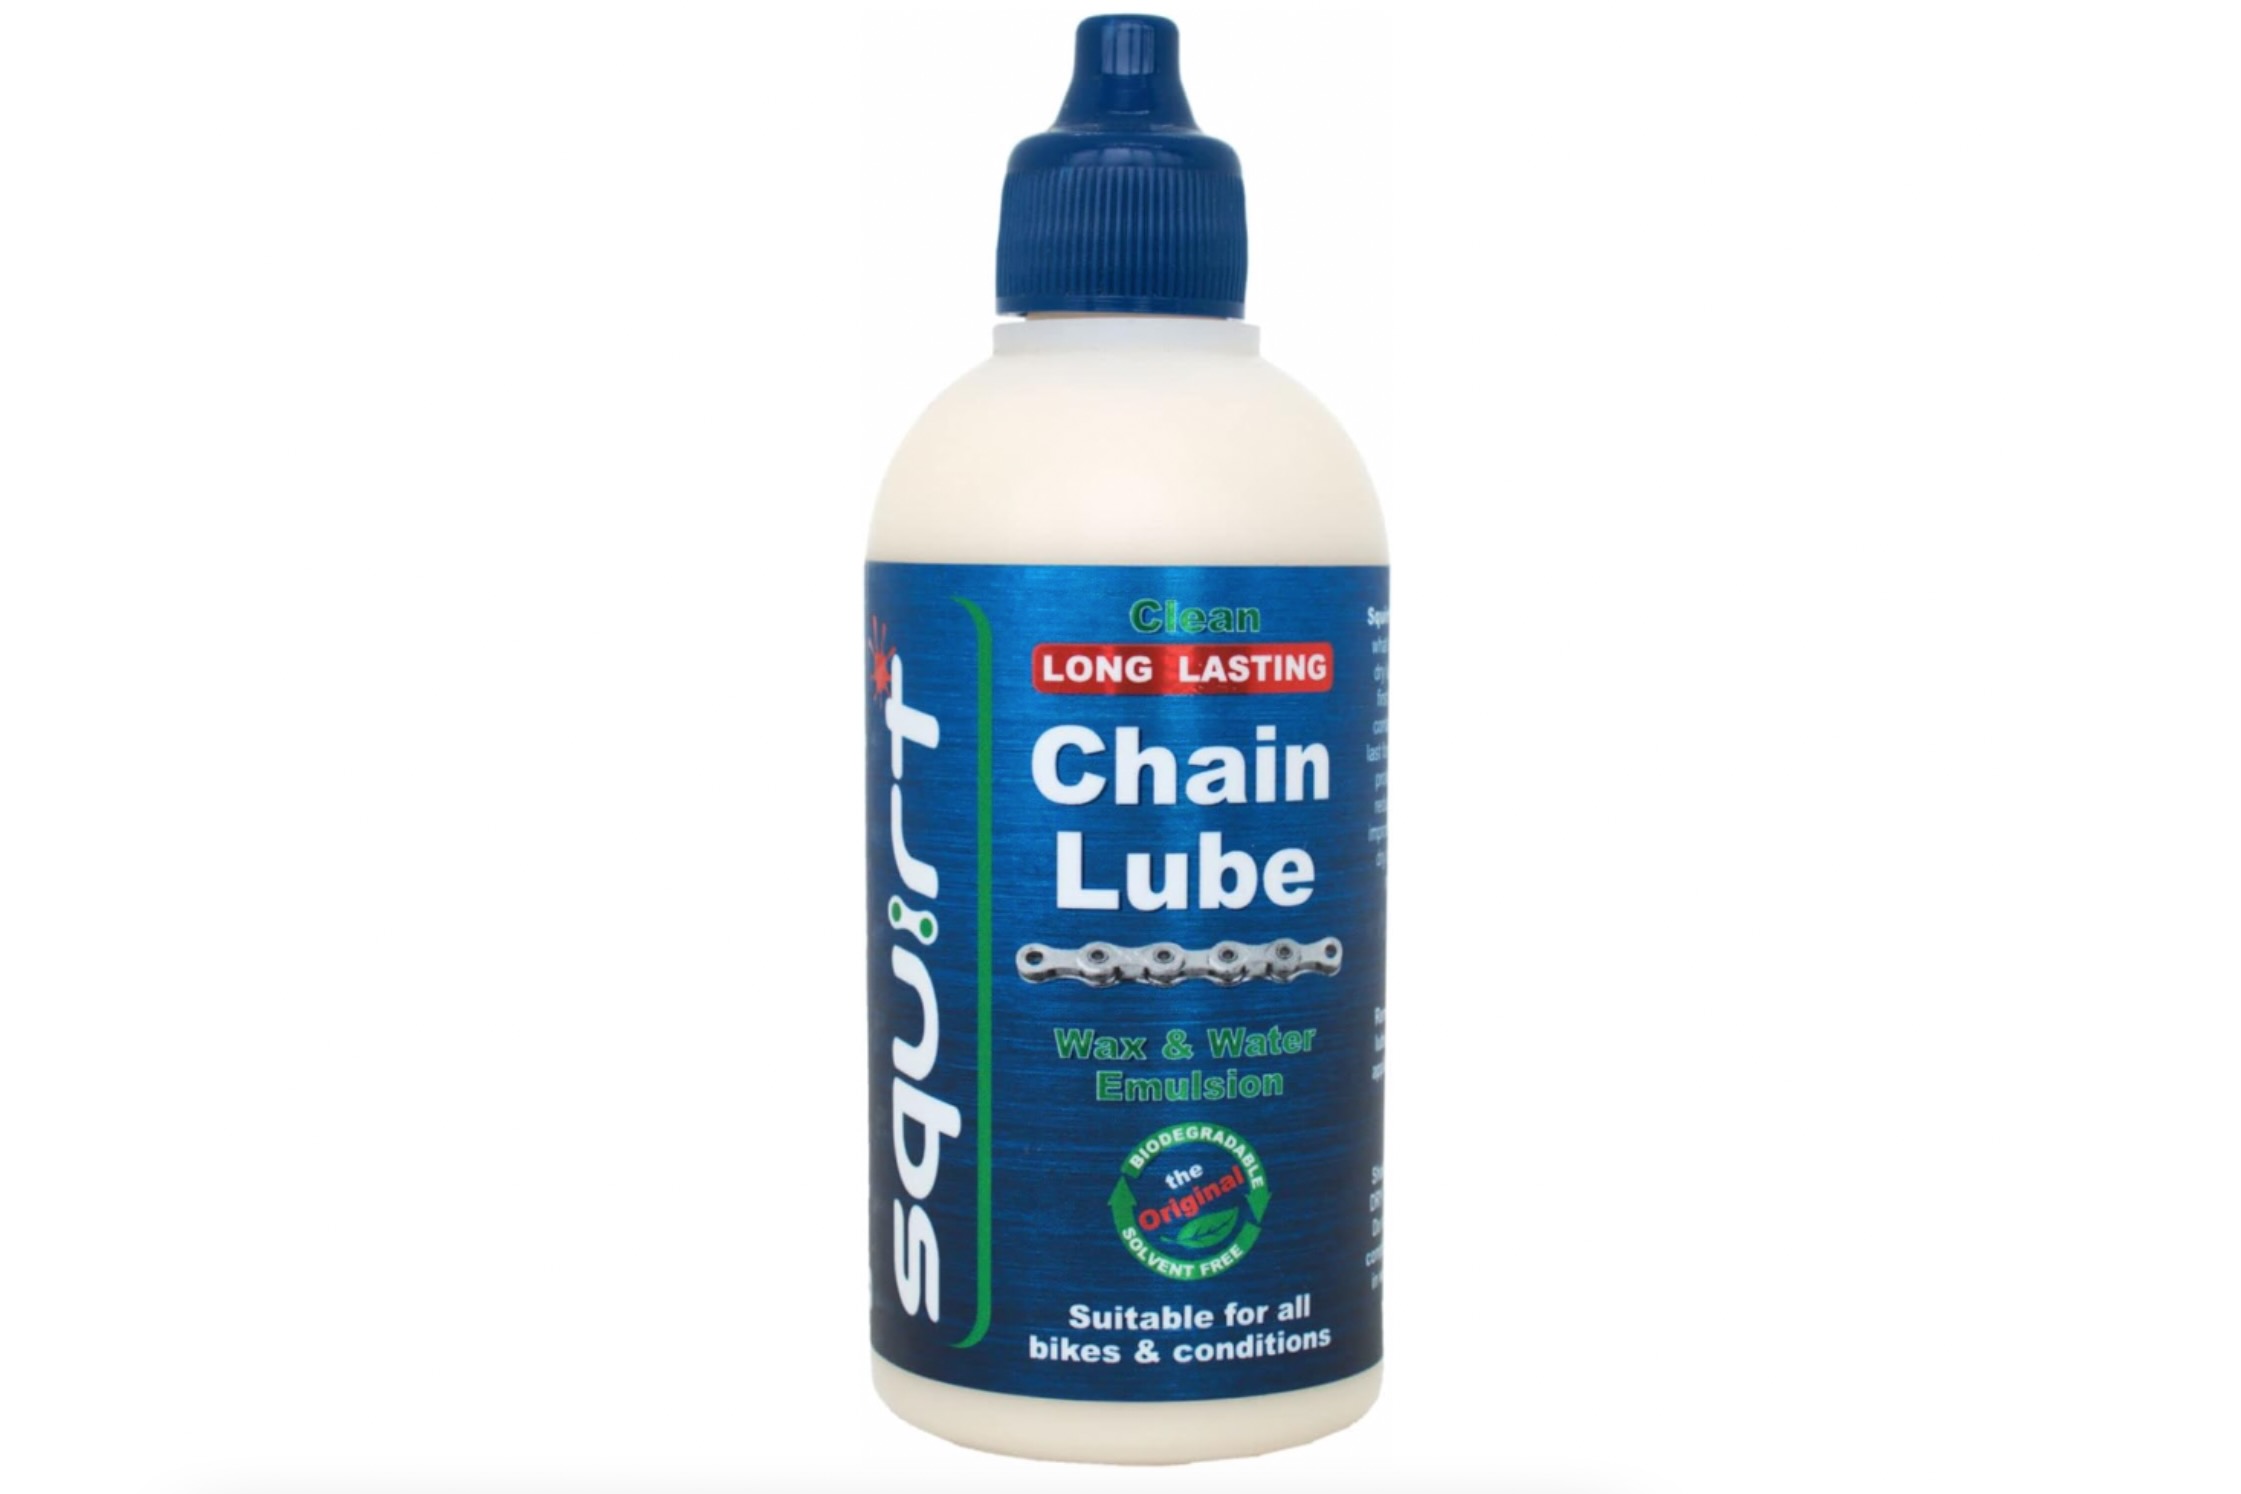 Squirt Long Lasting Chain Lube